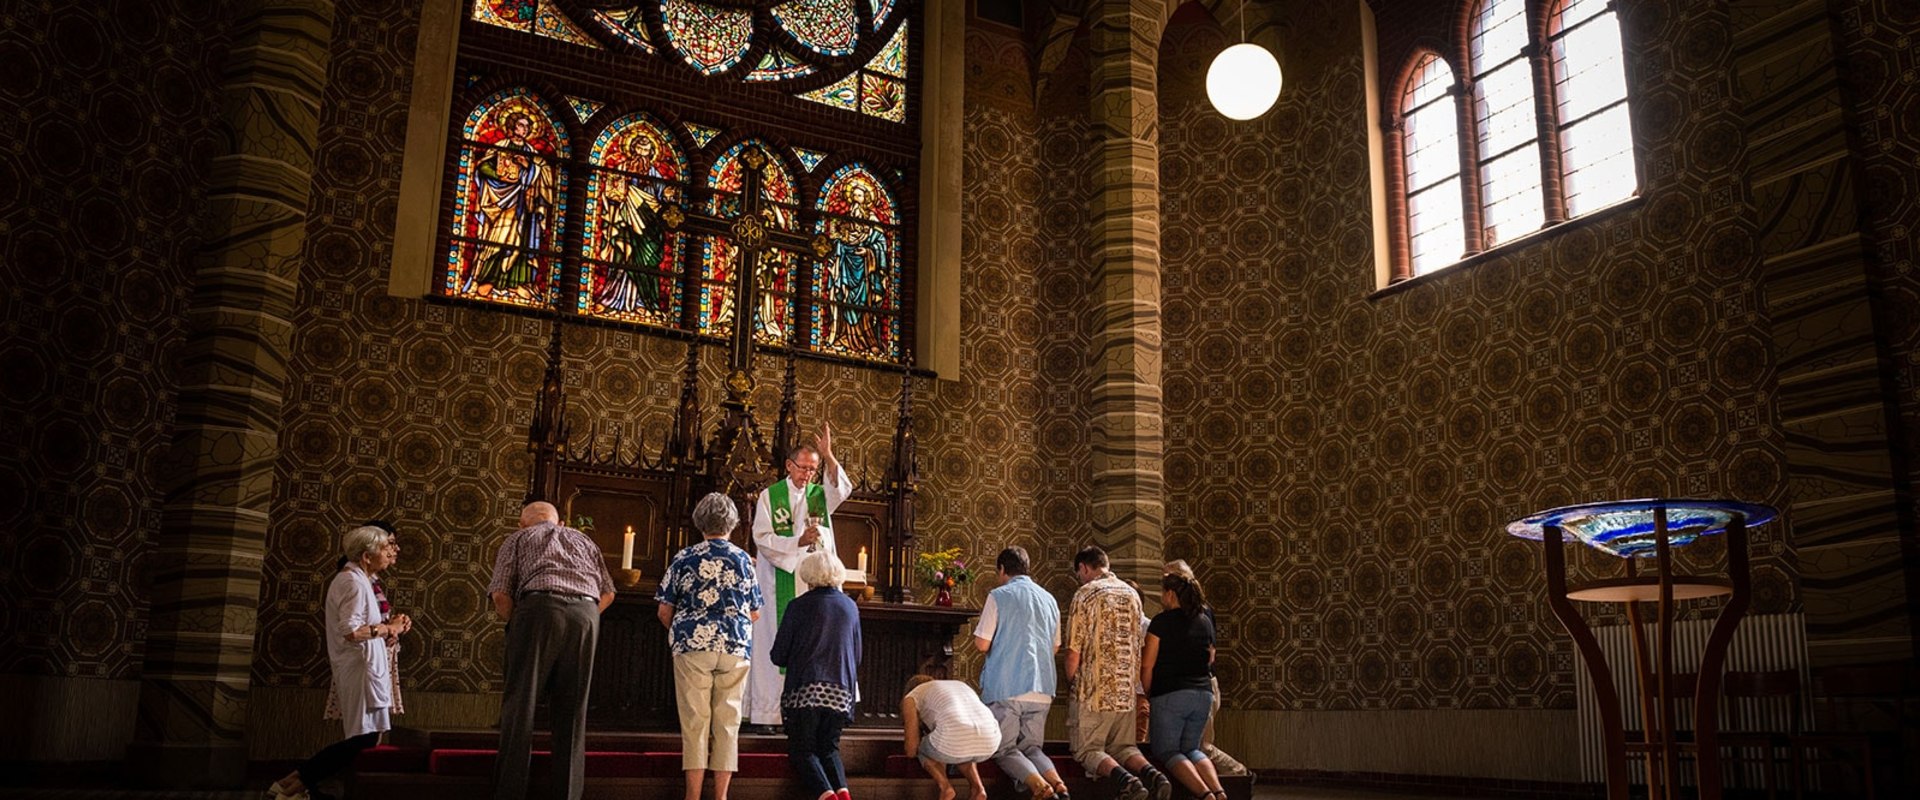 How Churches in St. Louis, Missouri Support and Embrace the Immigrant Community